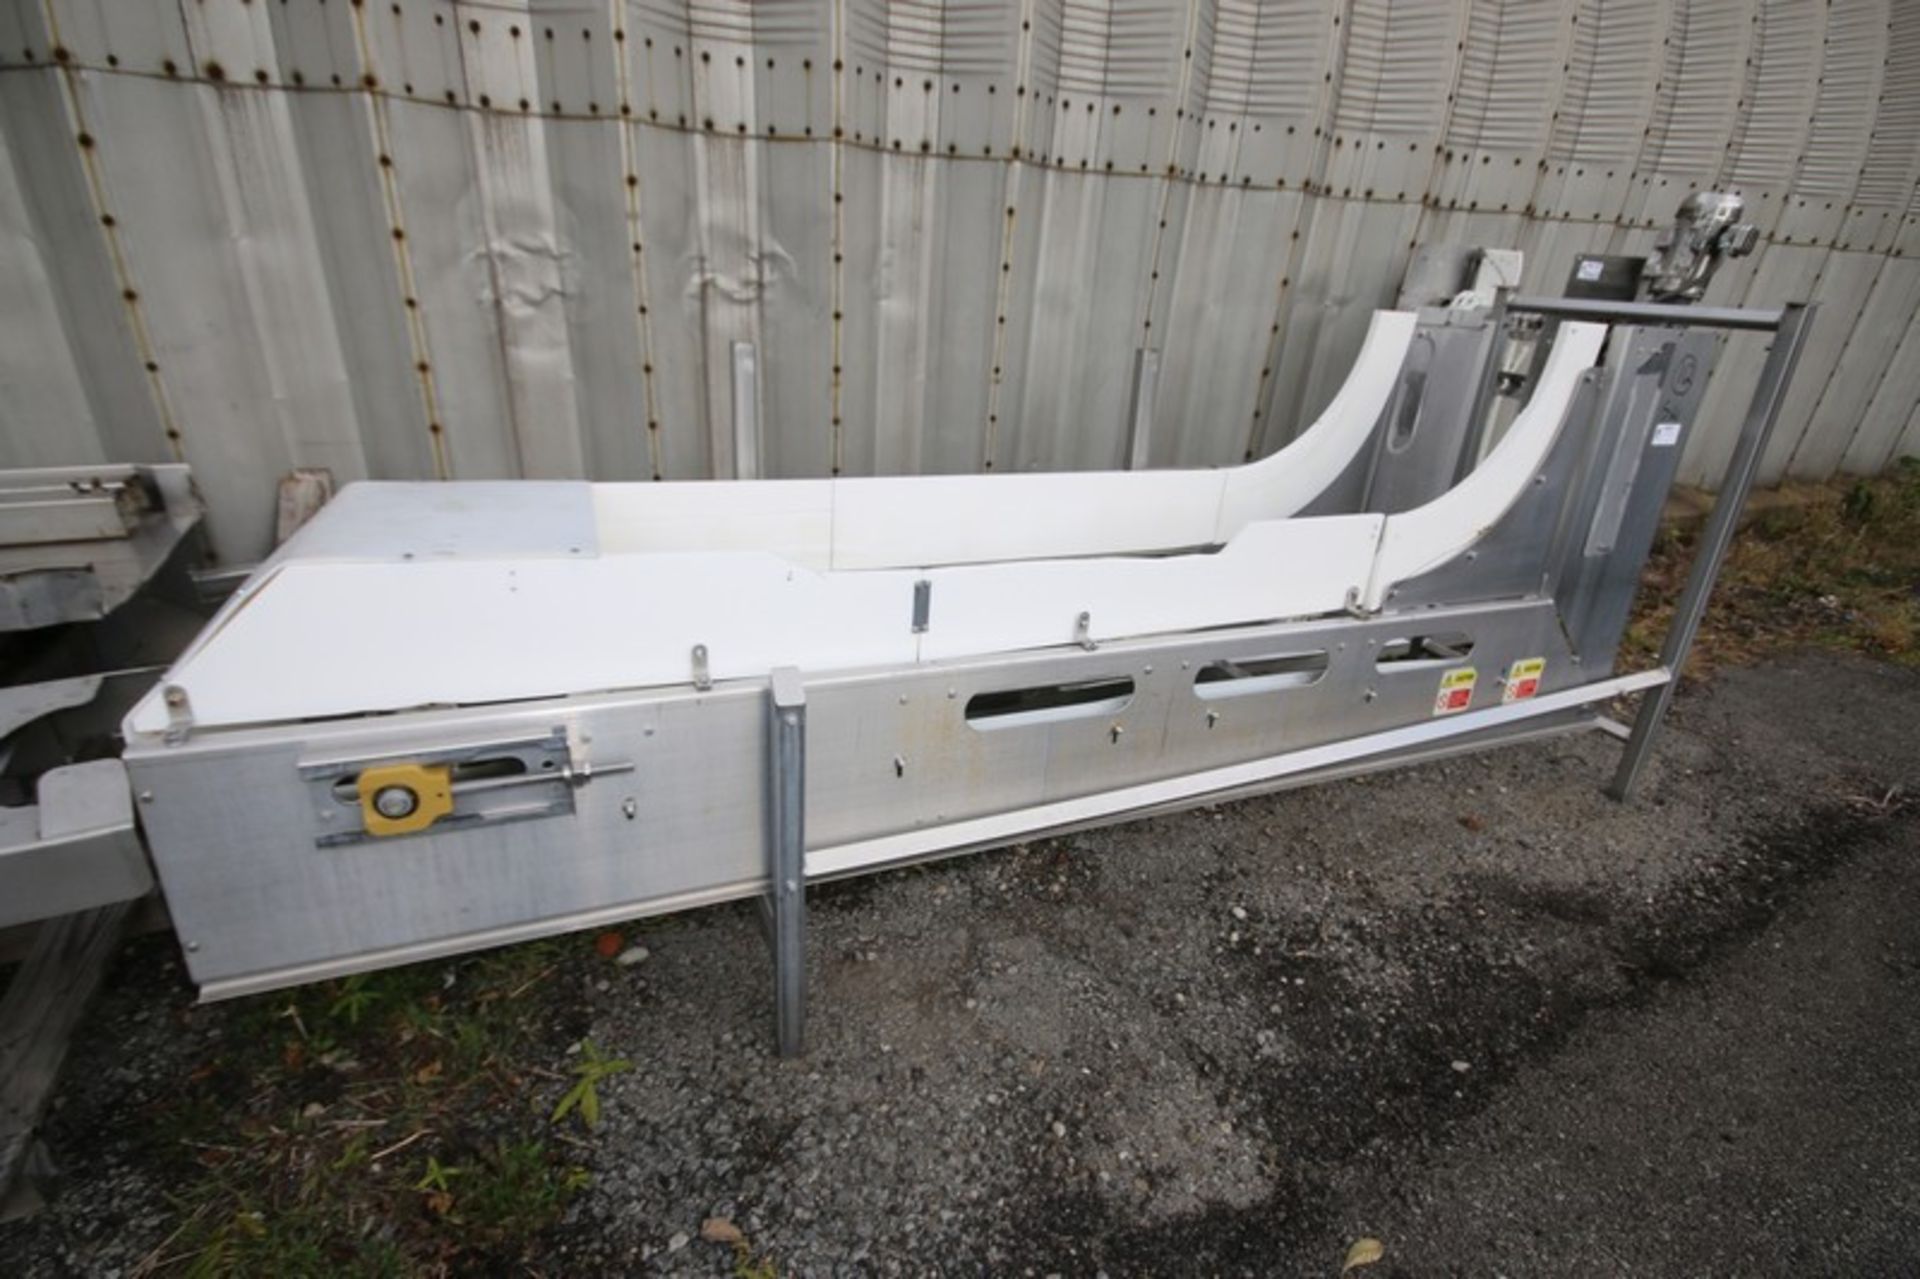 Key Aprox. 18' H x 22" W Z Configuration System, Currently in (2) Pcs., with WEG 1 hp/1725 rpm Drive - Image 5 of 5